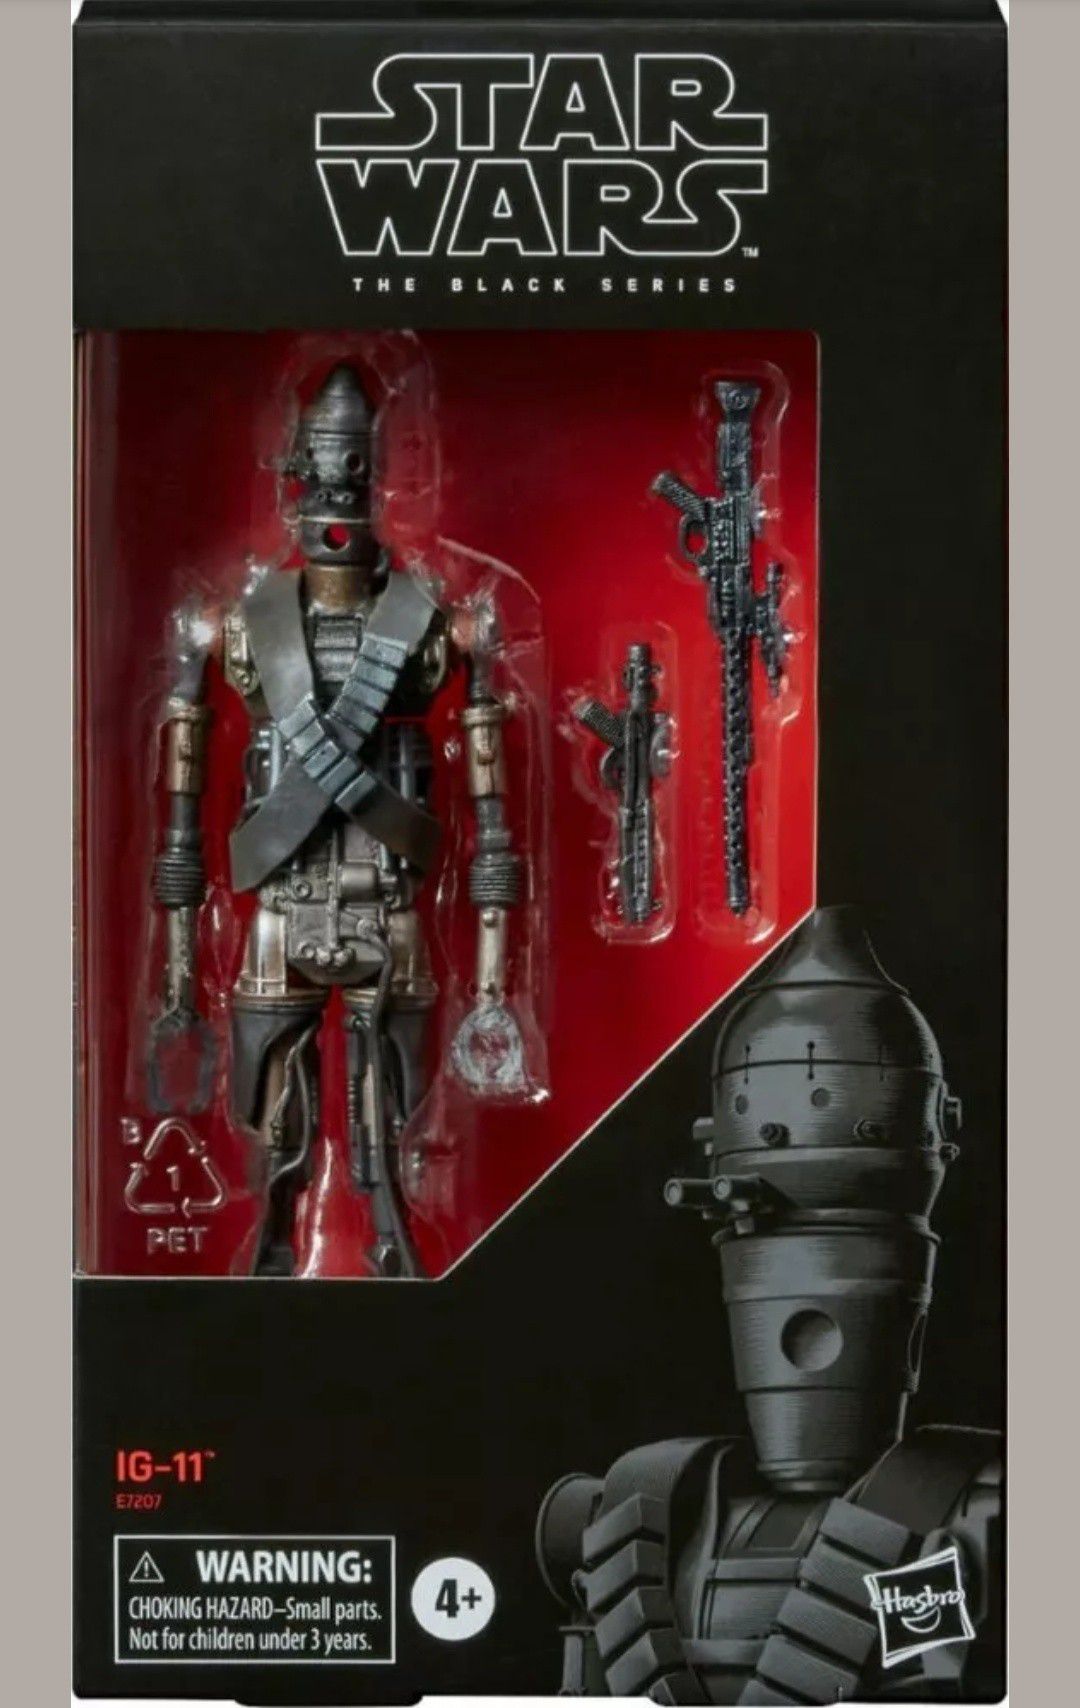 Brand new exclusive Hasbro Star Wars Black Series IG-11 figure from The Mandalorian